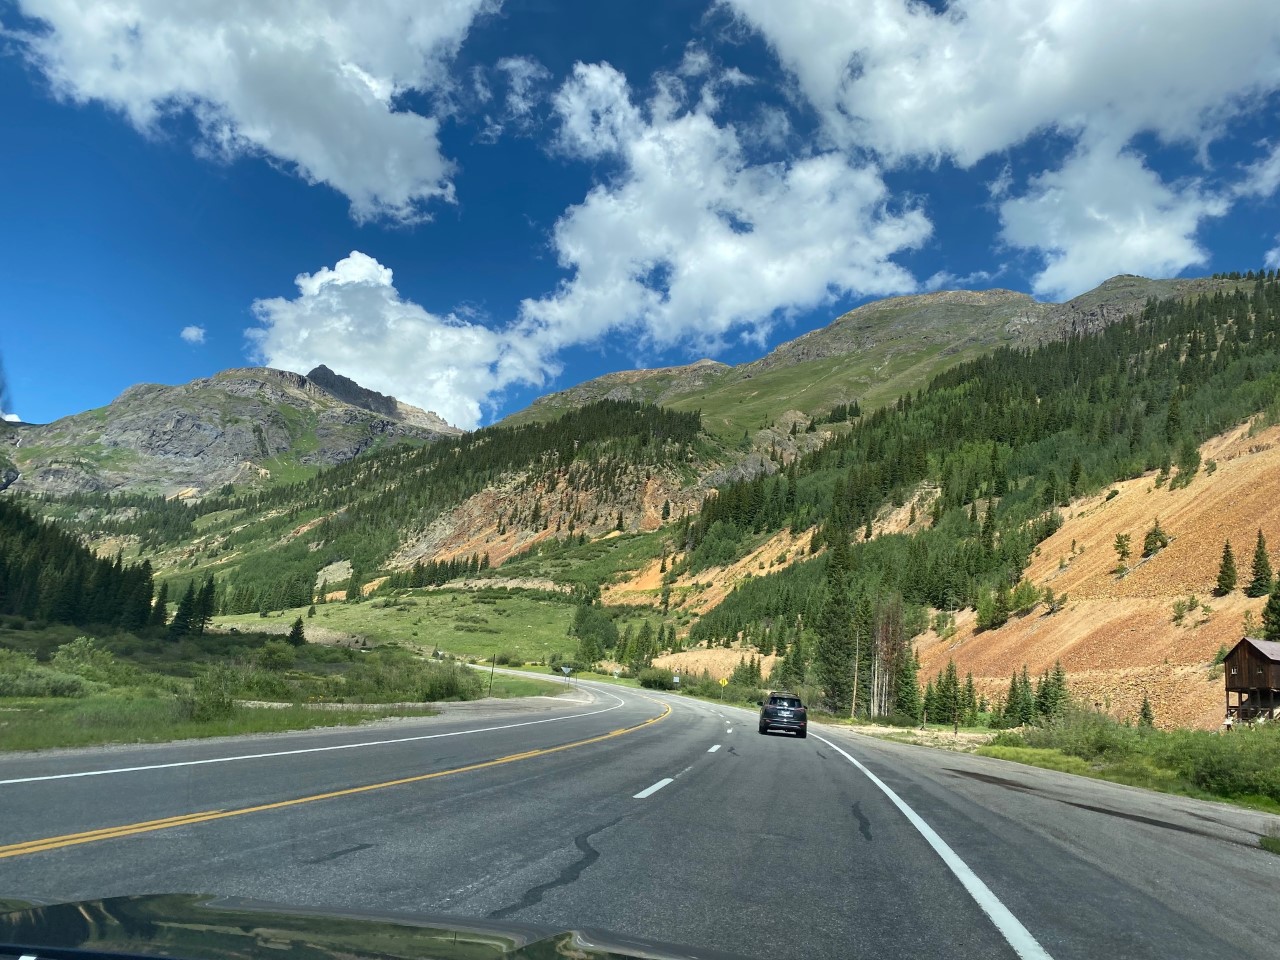 Driving Million Dollar Highway from Silverton to Ouray, Colorado